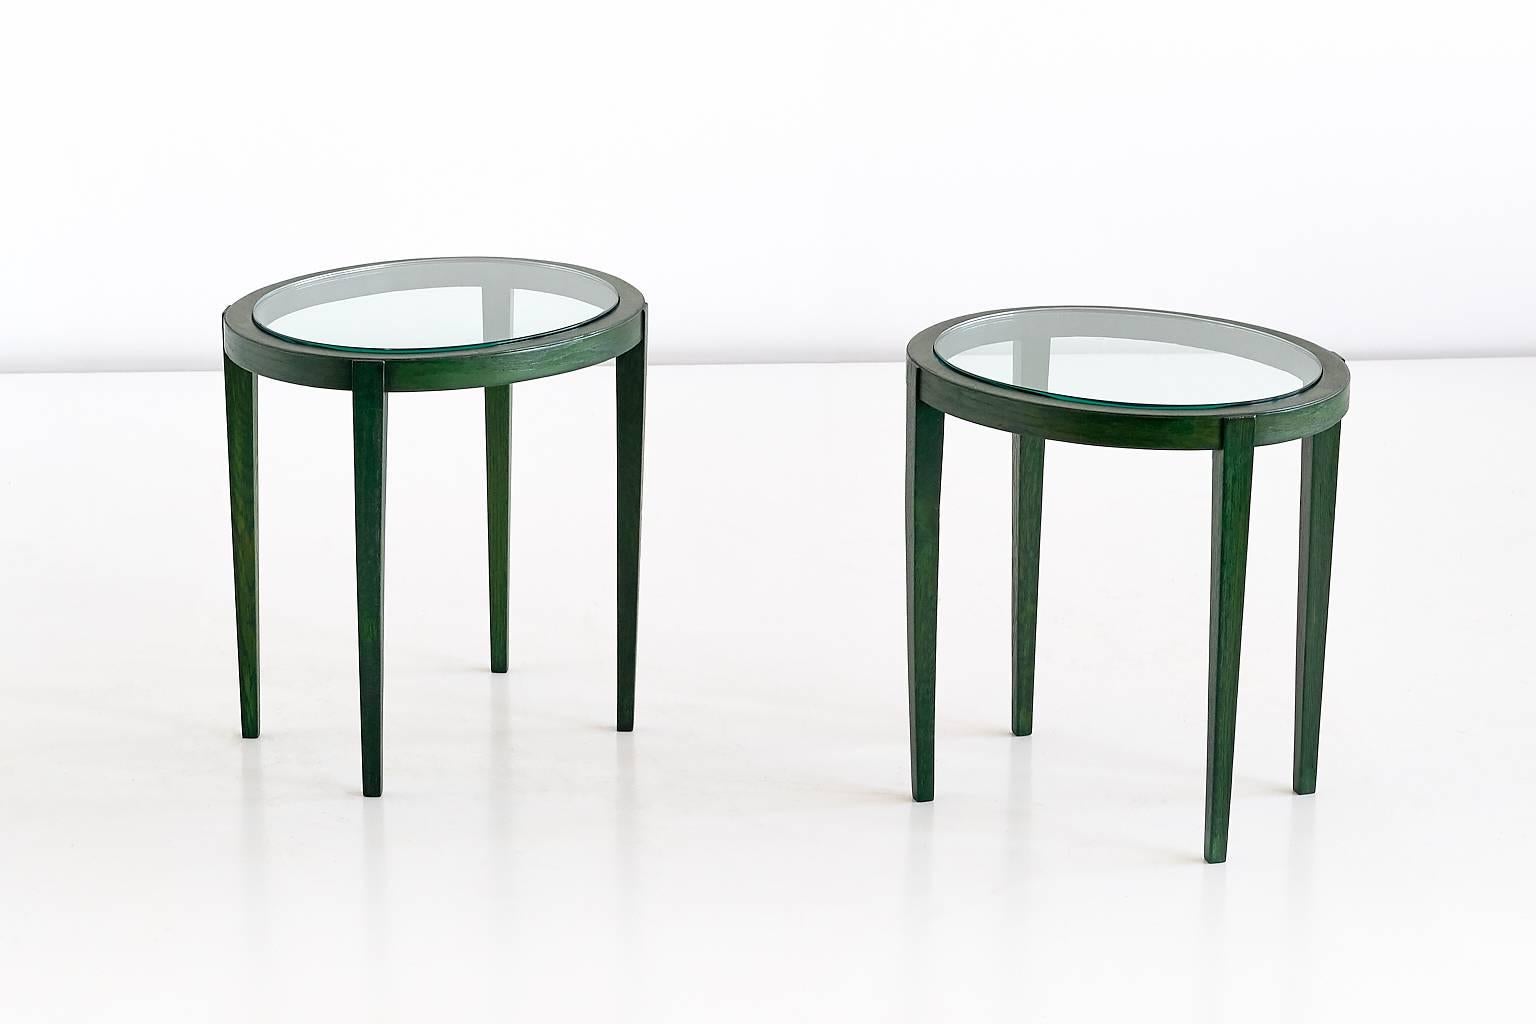 This pair of green side tables was a custom design for a private palazzo residence in Florence. Made in the late 1930s, the tables were part of a dining room which had an entirely green decor. 
The table is executed in a solid elm wood with an oval